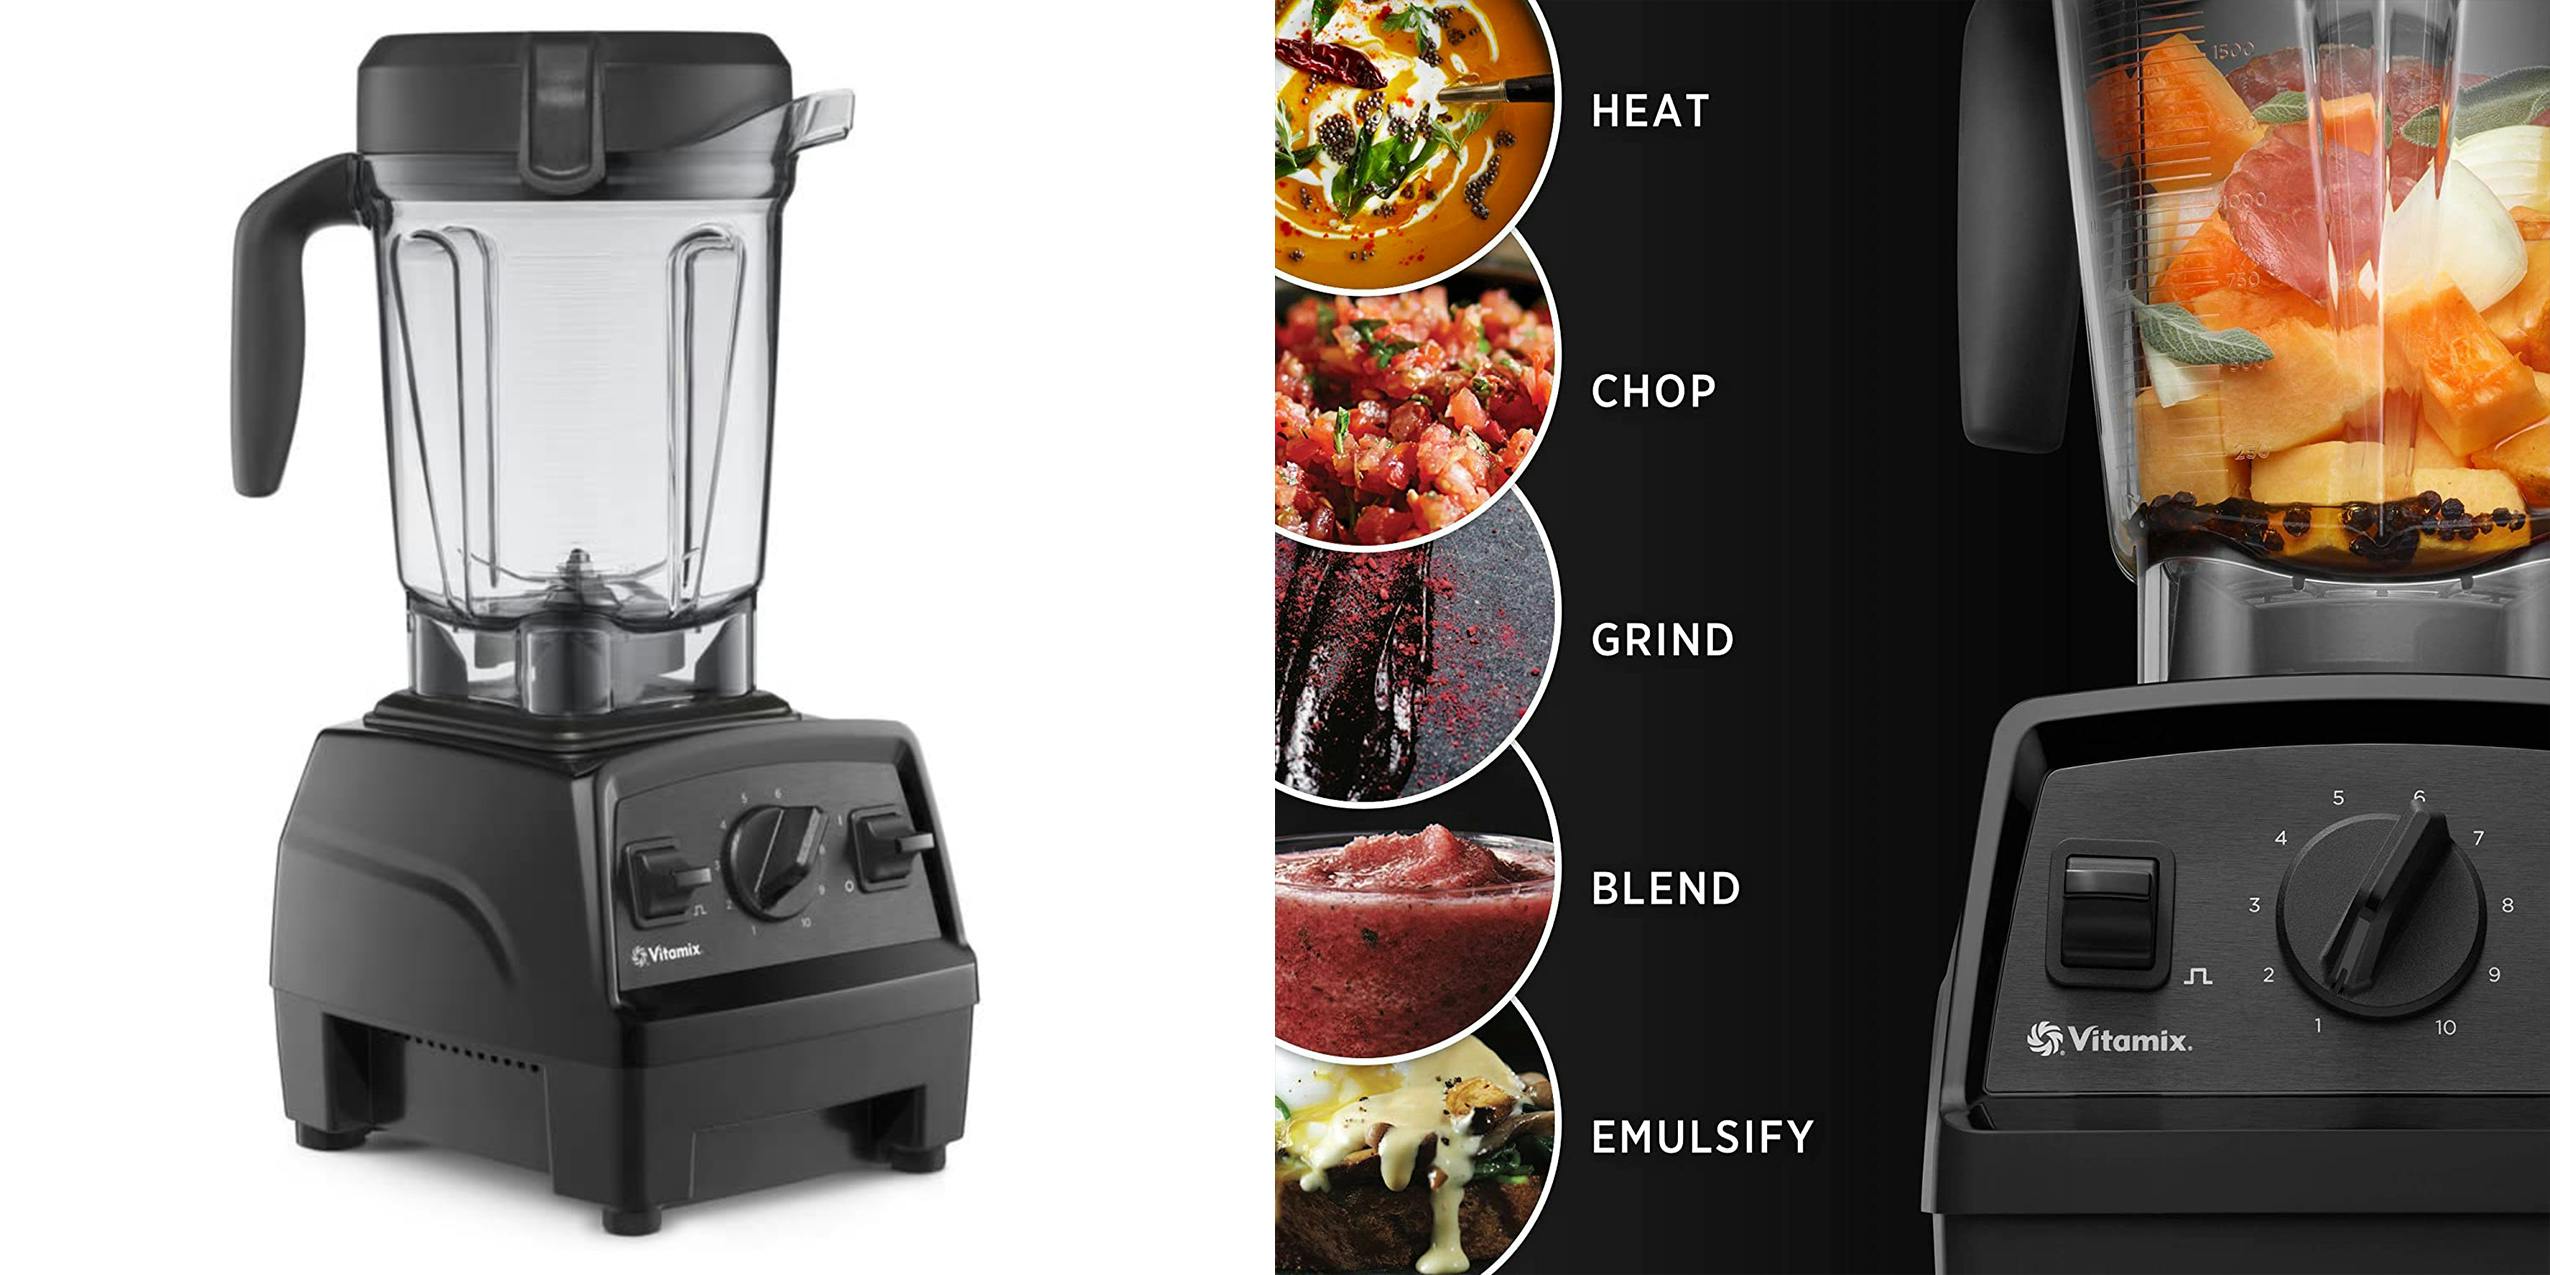 A Vitamix Explorian blender along with a peak at its features.